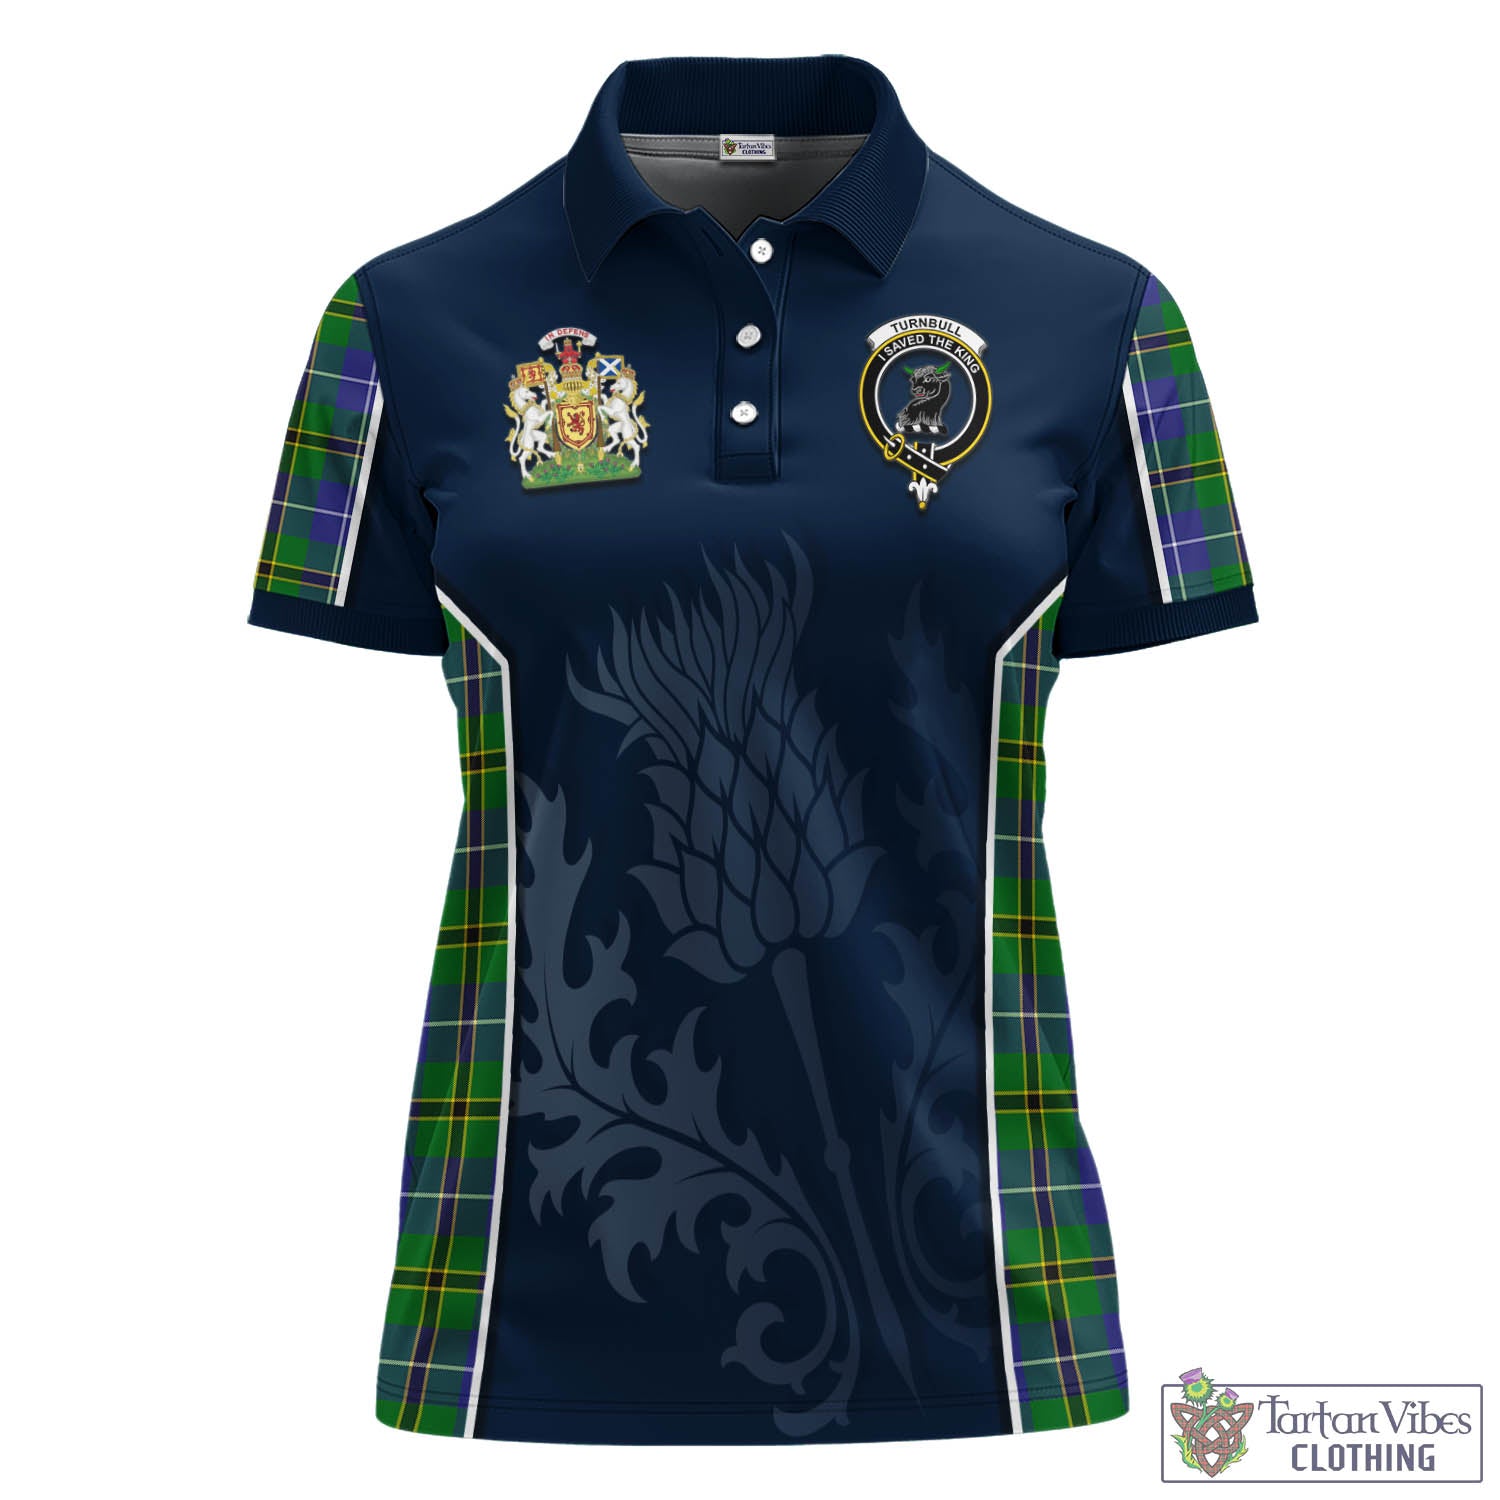 Tartan Vibes Clothing Turnbull Hunting Tartan Women's Polo Shirt with Family Crest and Scottish Thistle Vibes Sport Style